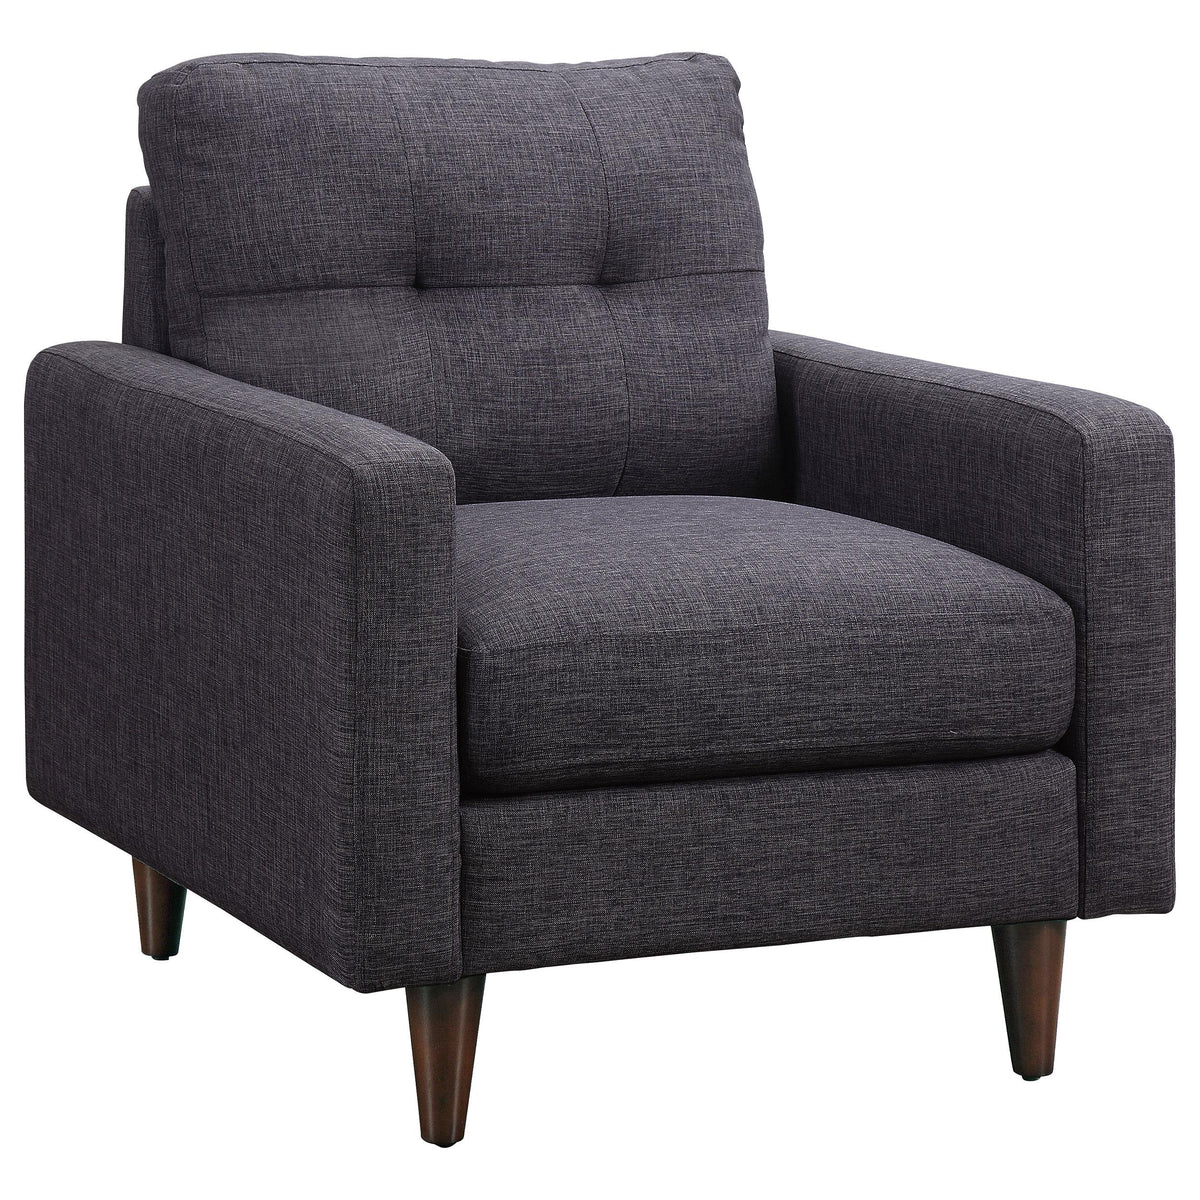 Watsonville Tufted Back Chair Grey  Las Vegas Furniture Stores